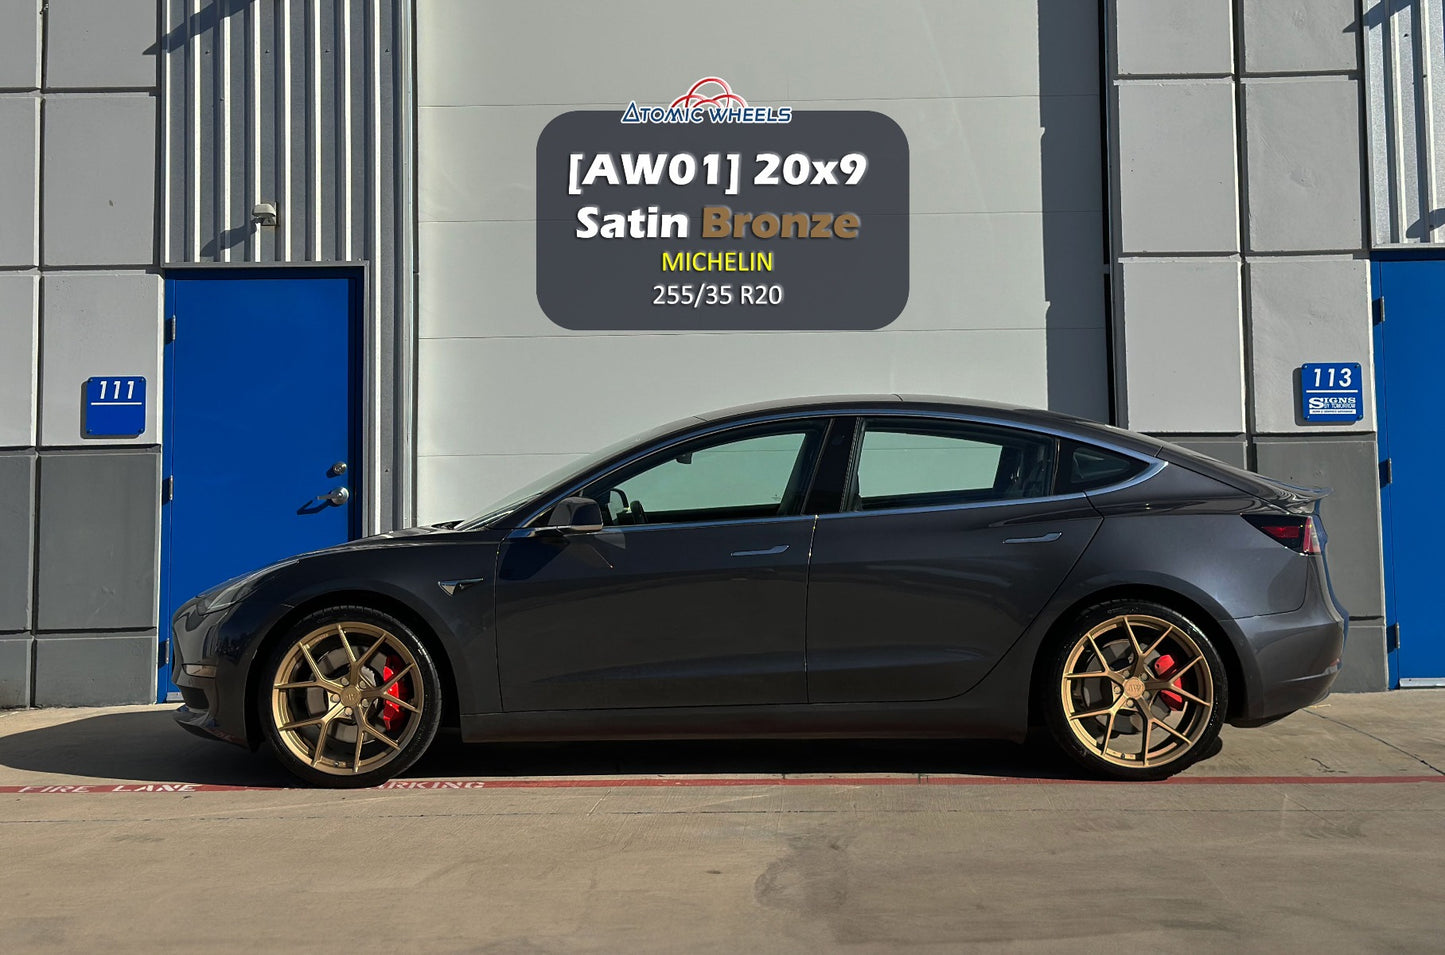 [AW01] for Tesla Model 3/Y